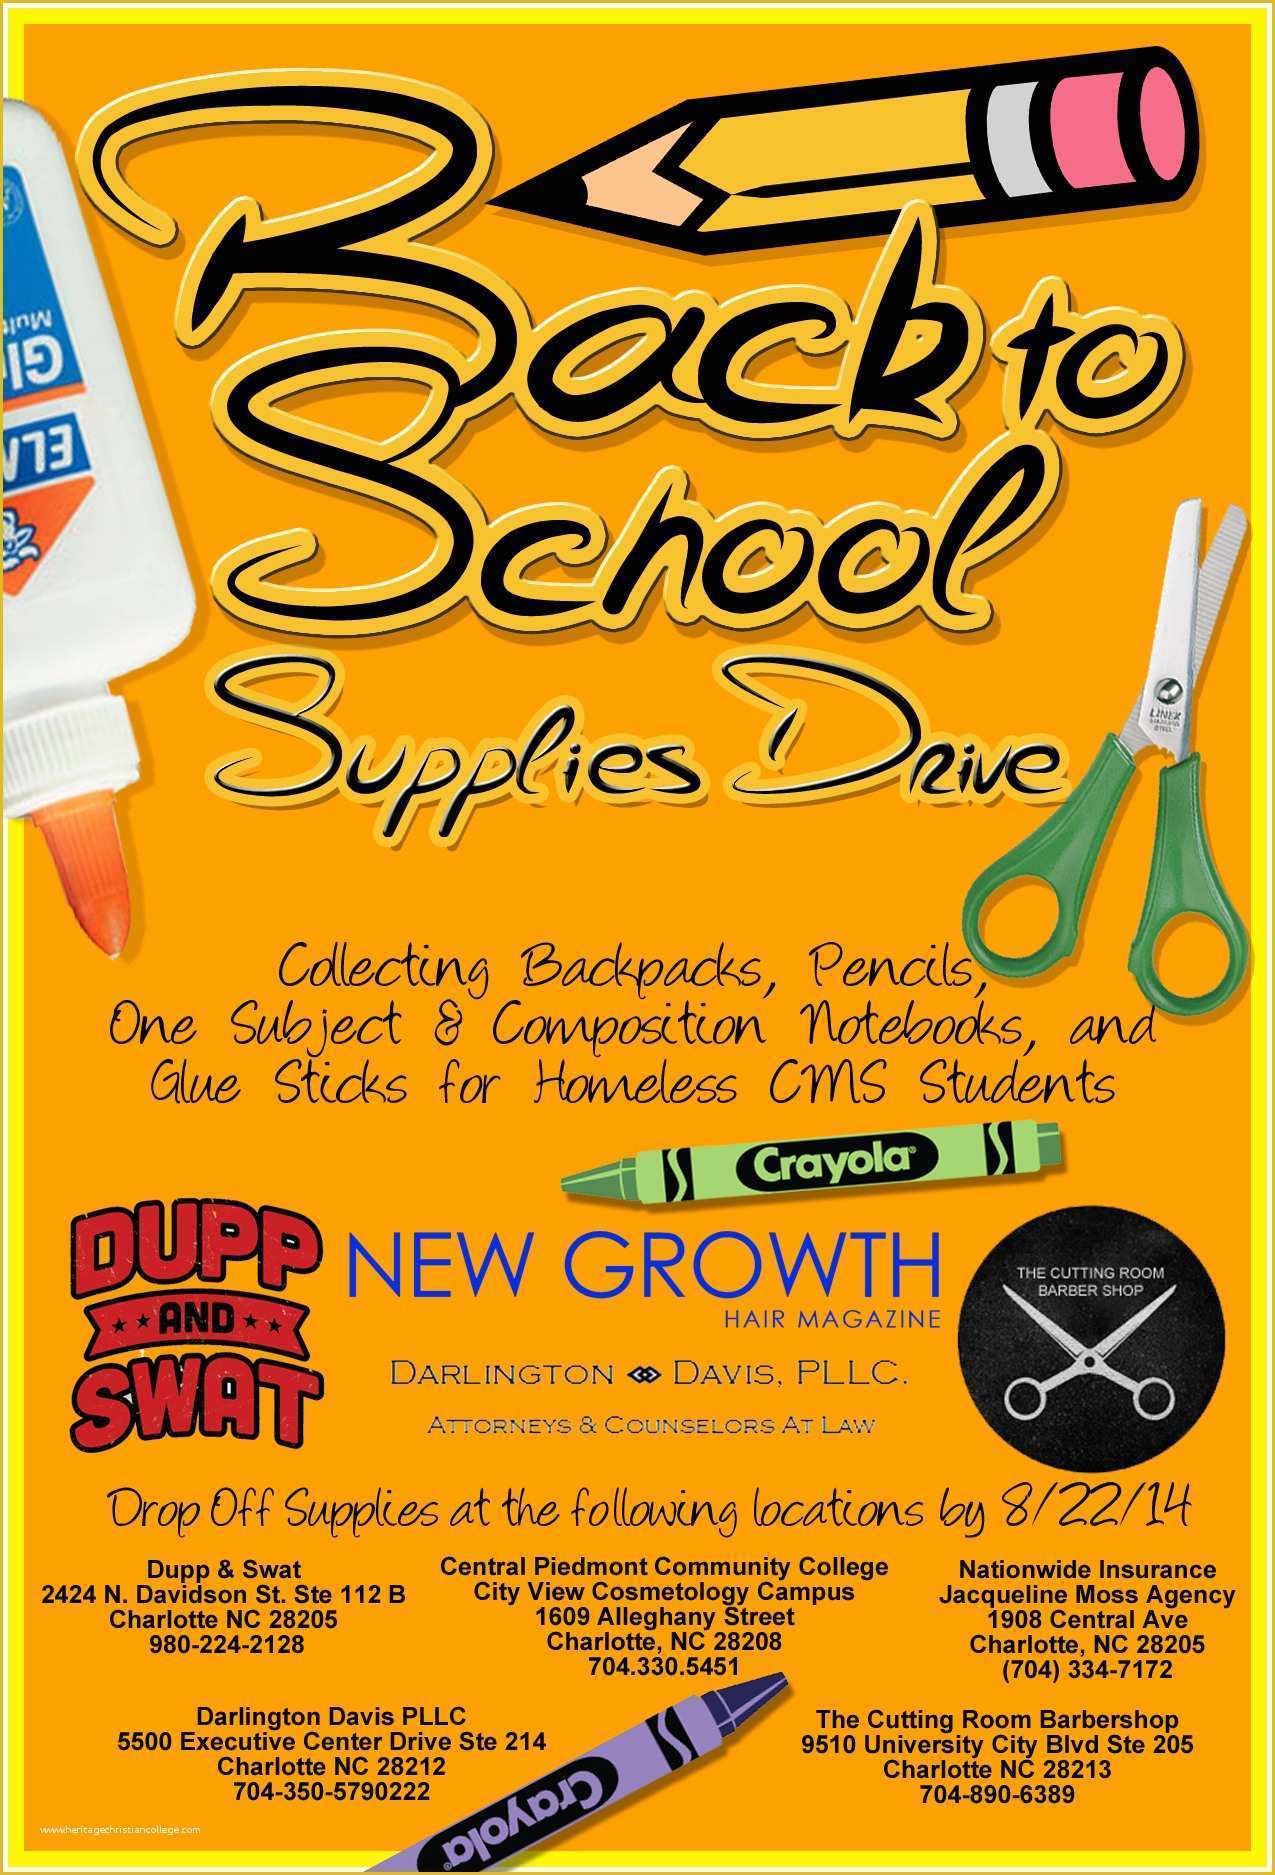 Free School Supply Drive Flyer Template Of School Supplies Drive for Homeless Cms Students